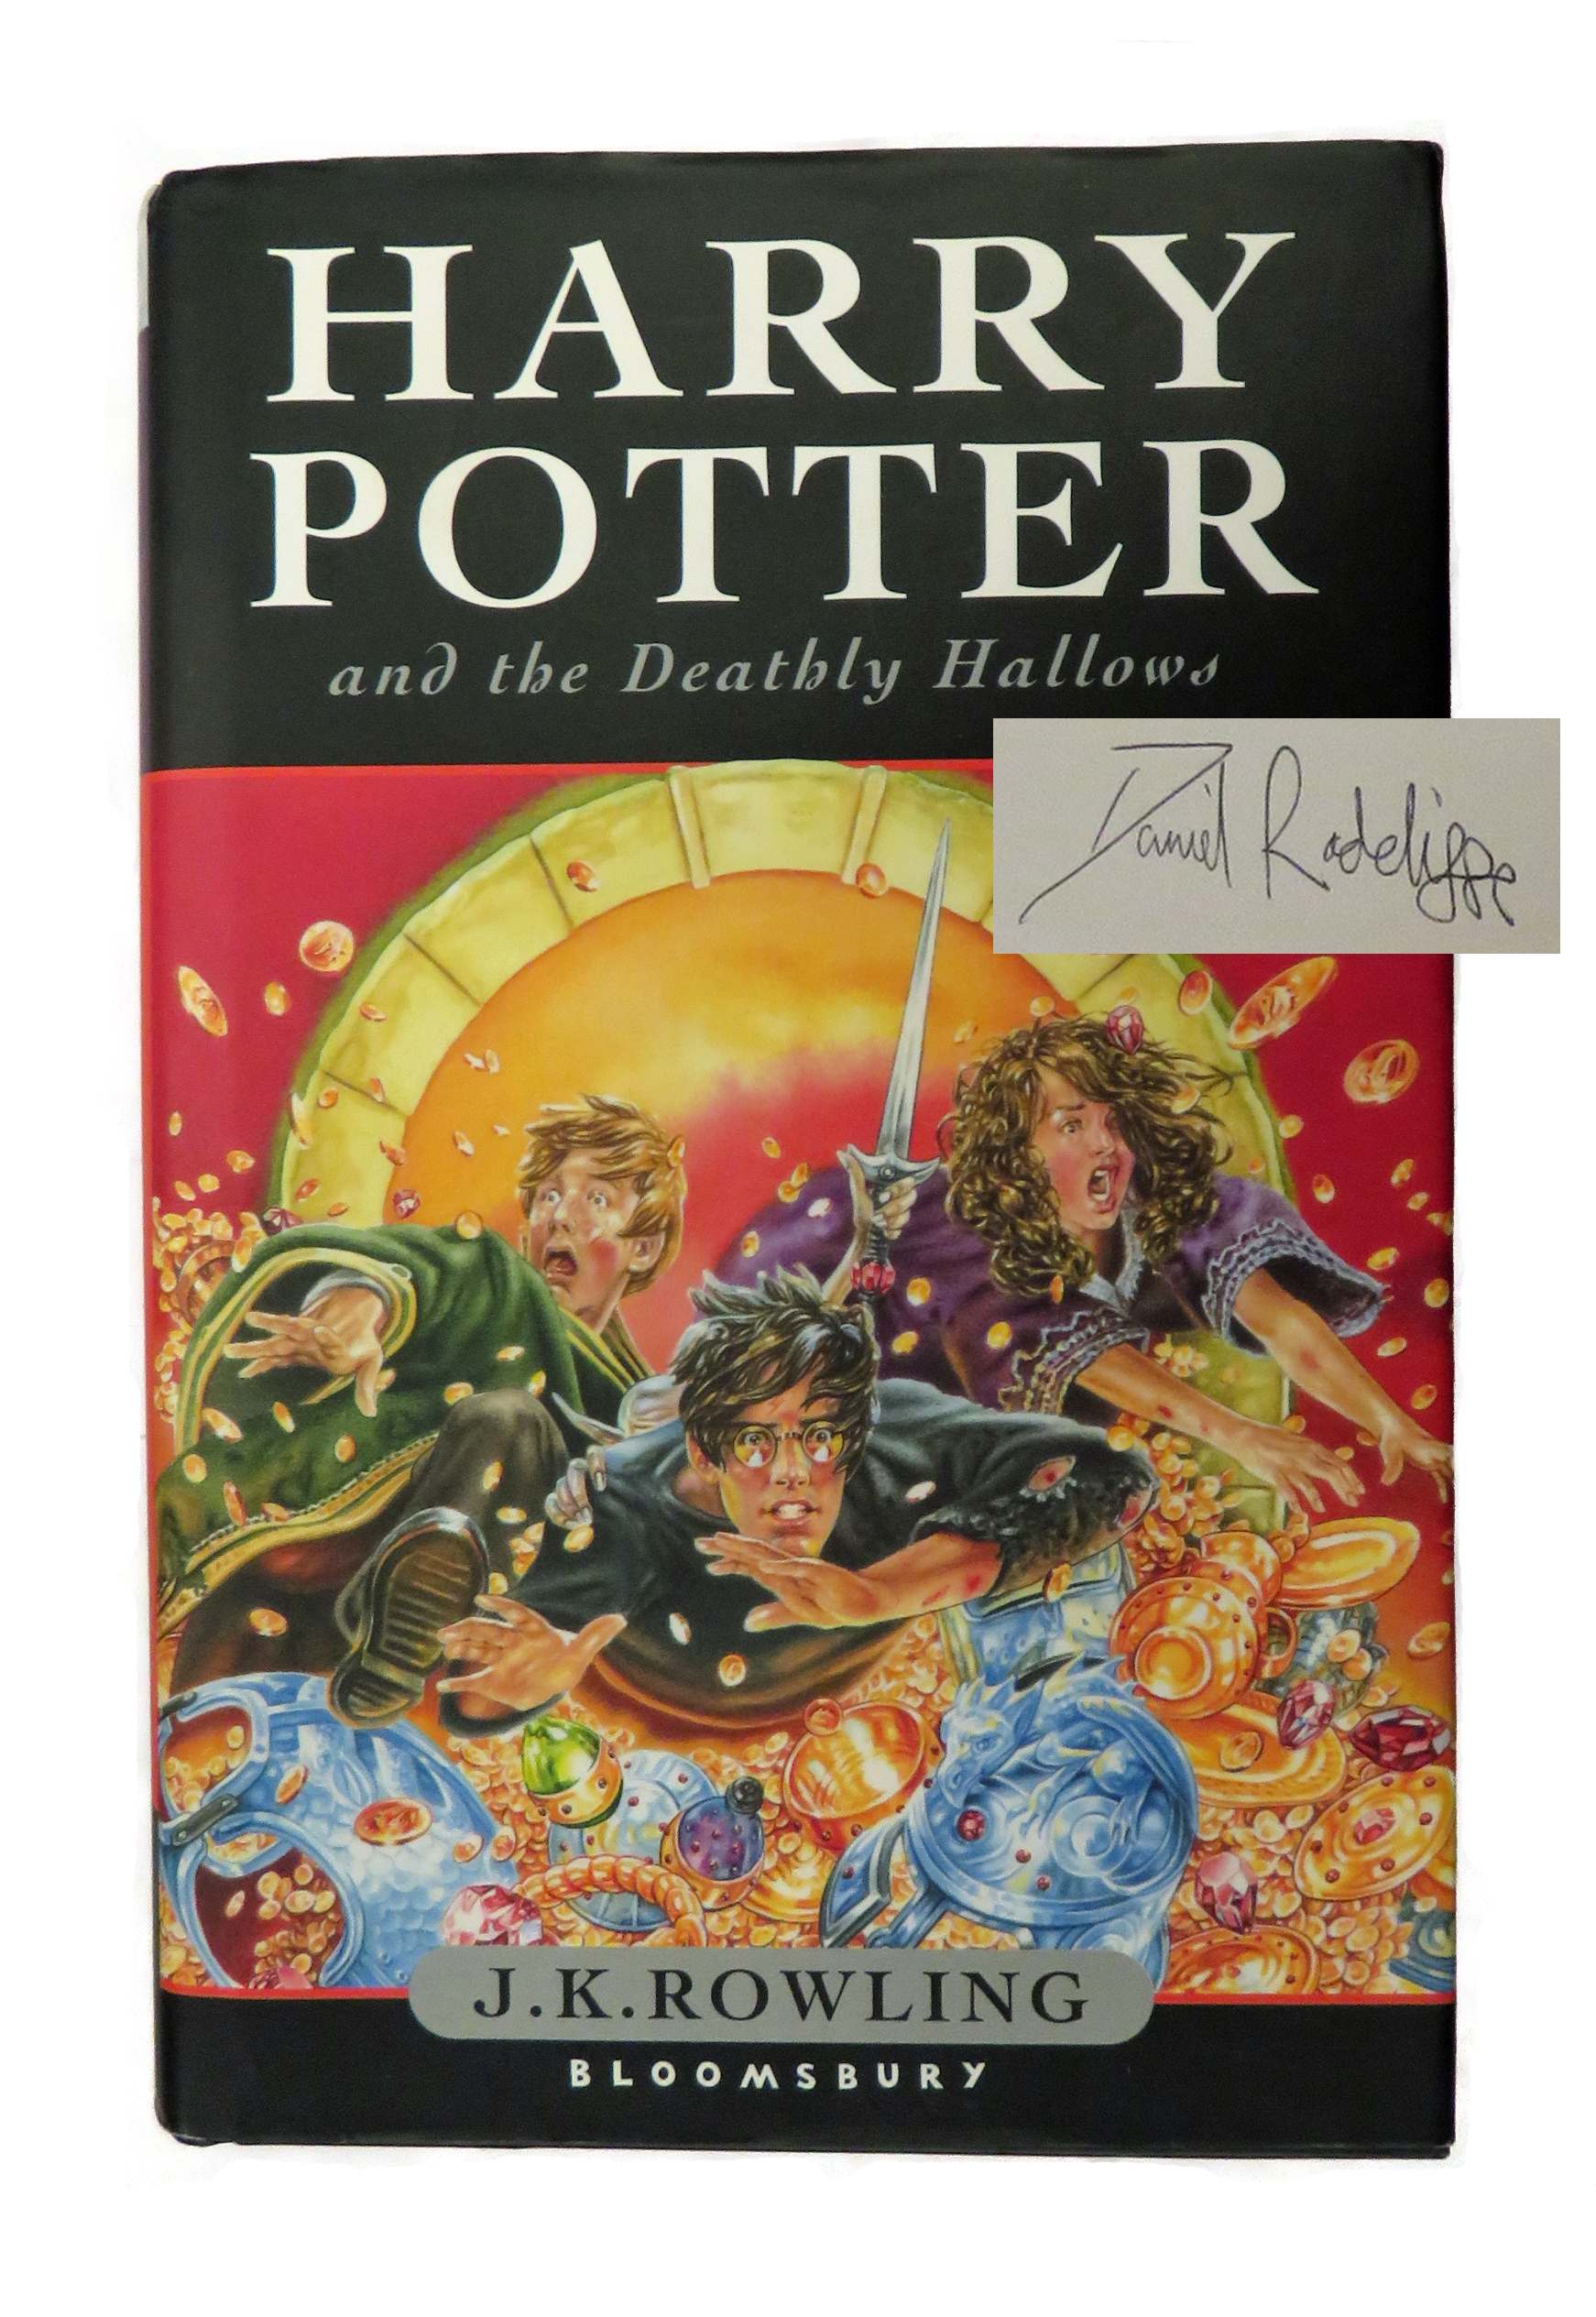 Harry Potter and the Deathly Hallows SIGNED by Daniel Radcliffe and other Cast Members